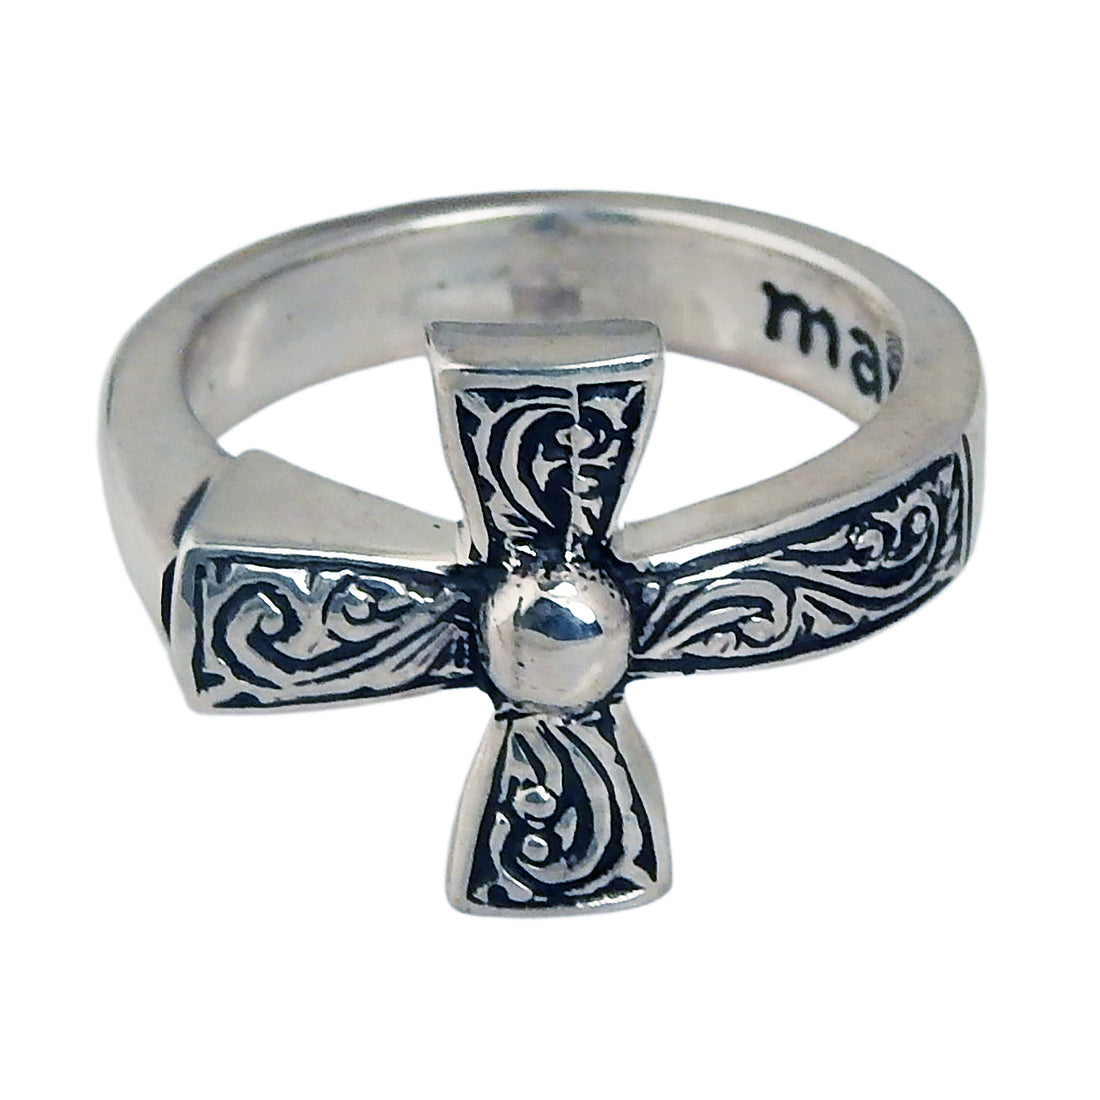 MARCOS - "CROSS" Inscribed Sterling Silver Ring